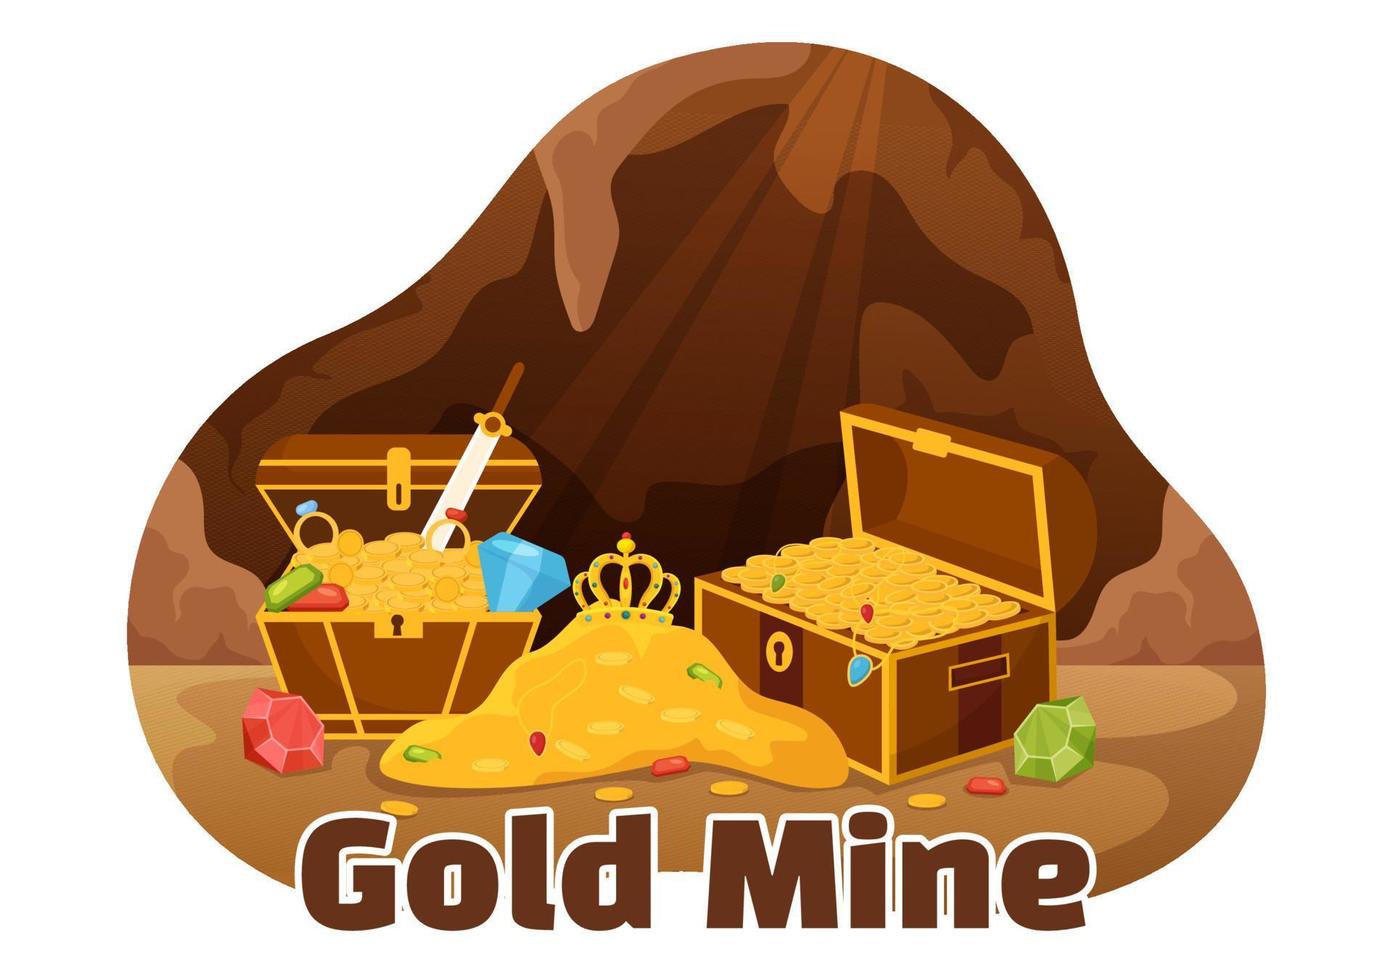 Gold Mine Illustration with Mining Industry Activity for Treasure, Pile of Coins, Jewelry and Gem in Flat Cartoon Hand Drawn Landing Page Templates vector